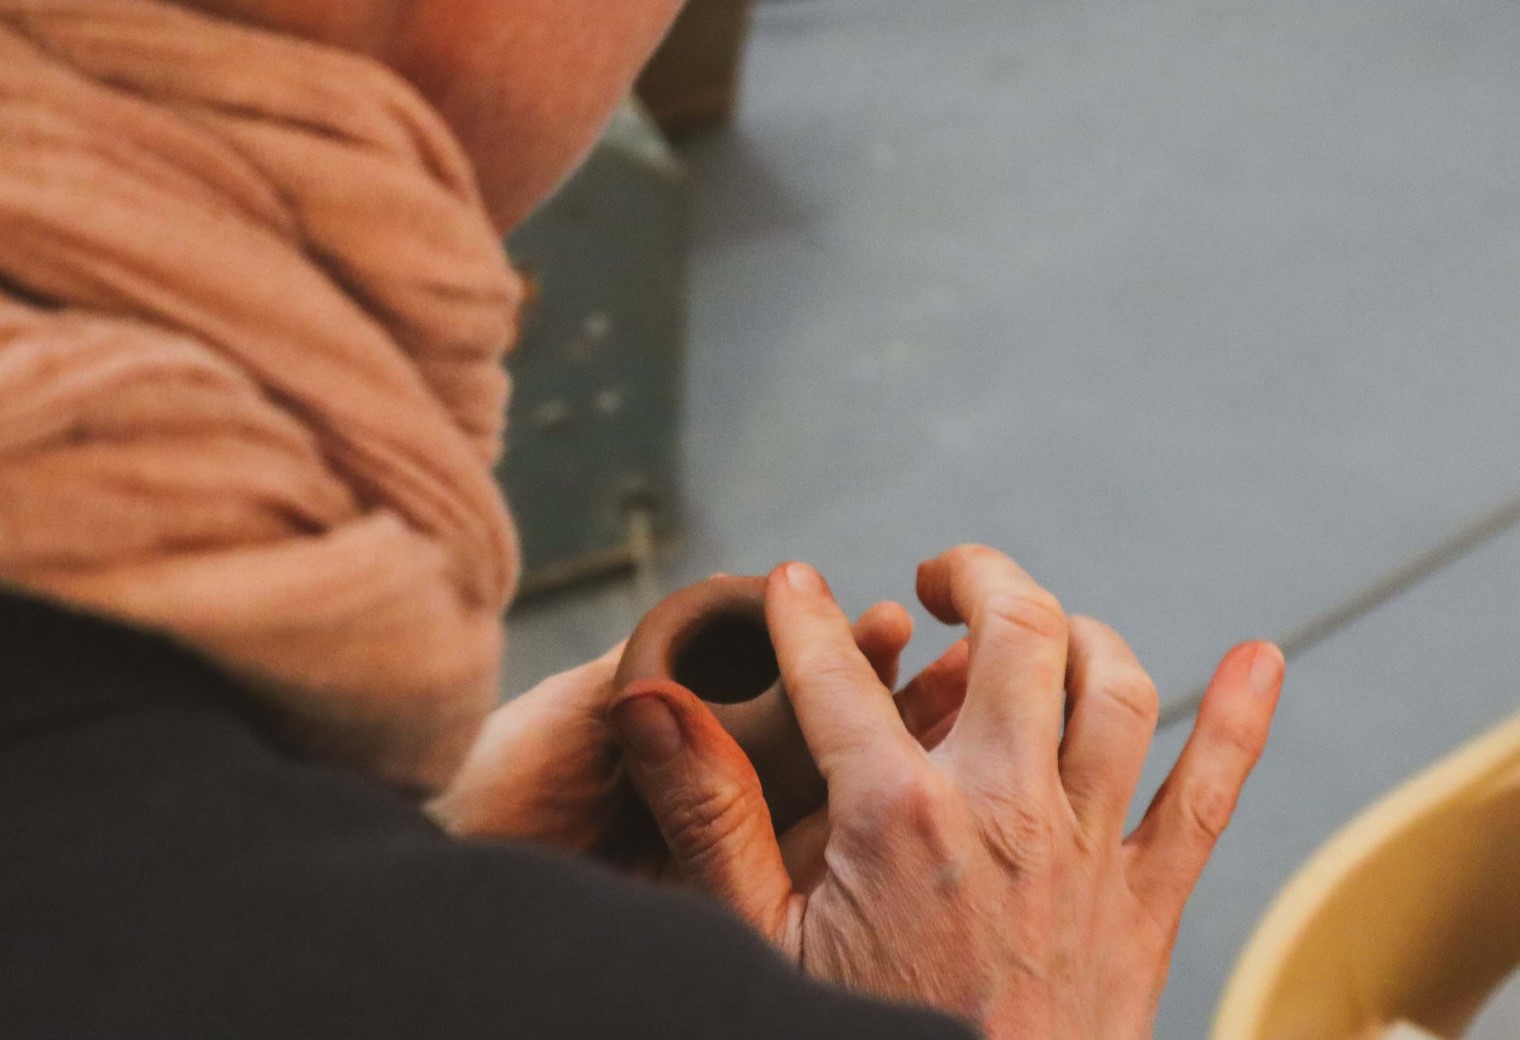 Ceramic Workshop - Around the Forms: The Bowl